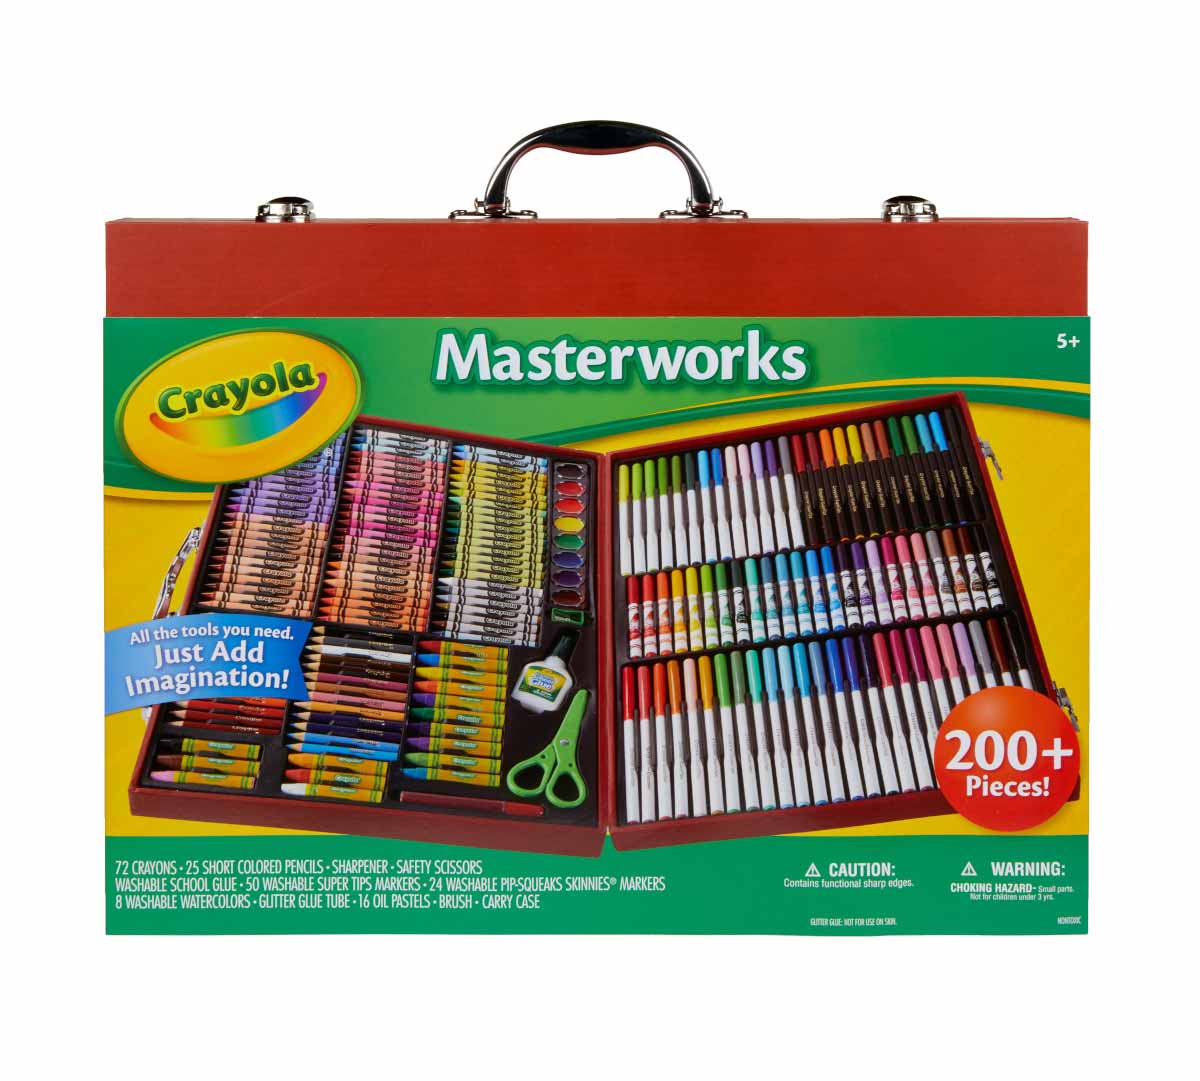 Crayola Masterworks Art Case (200+ Pcs), Art Set For Kids, Markers, Paints,  Colored Pencils, & Crayons, Holiday Gift for Kids, Toys, 4+